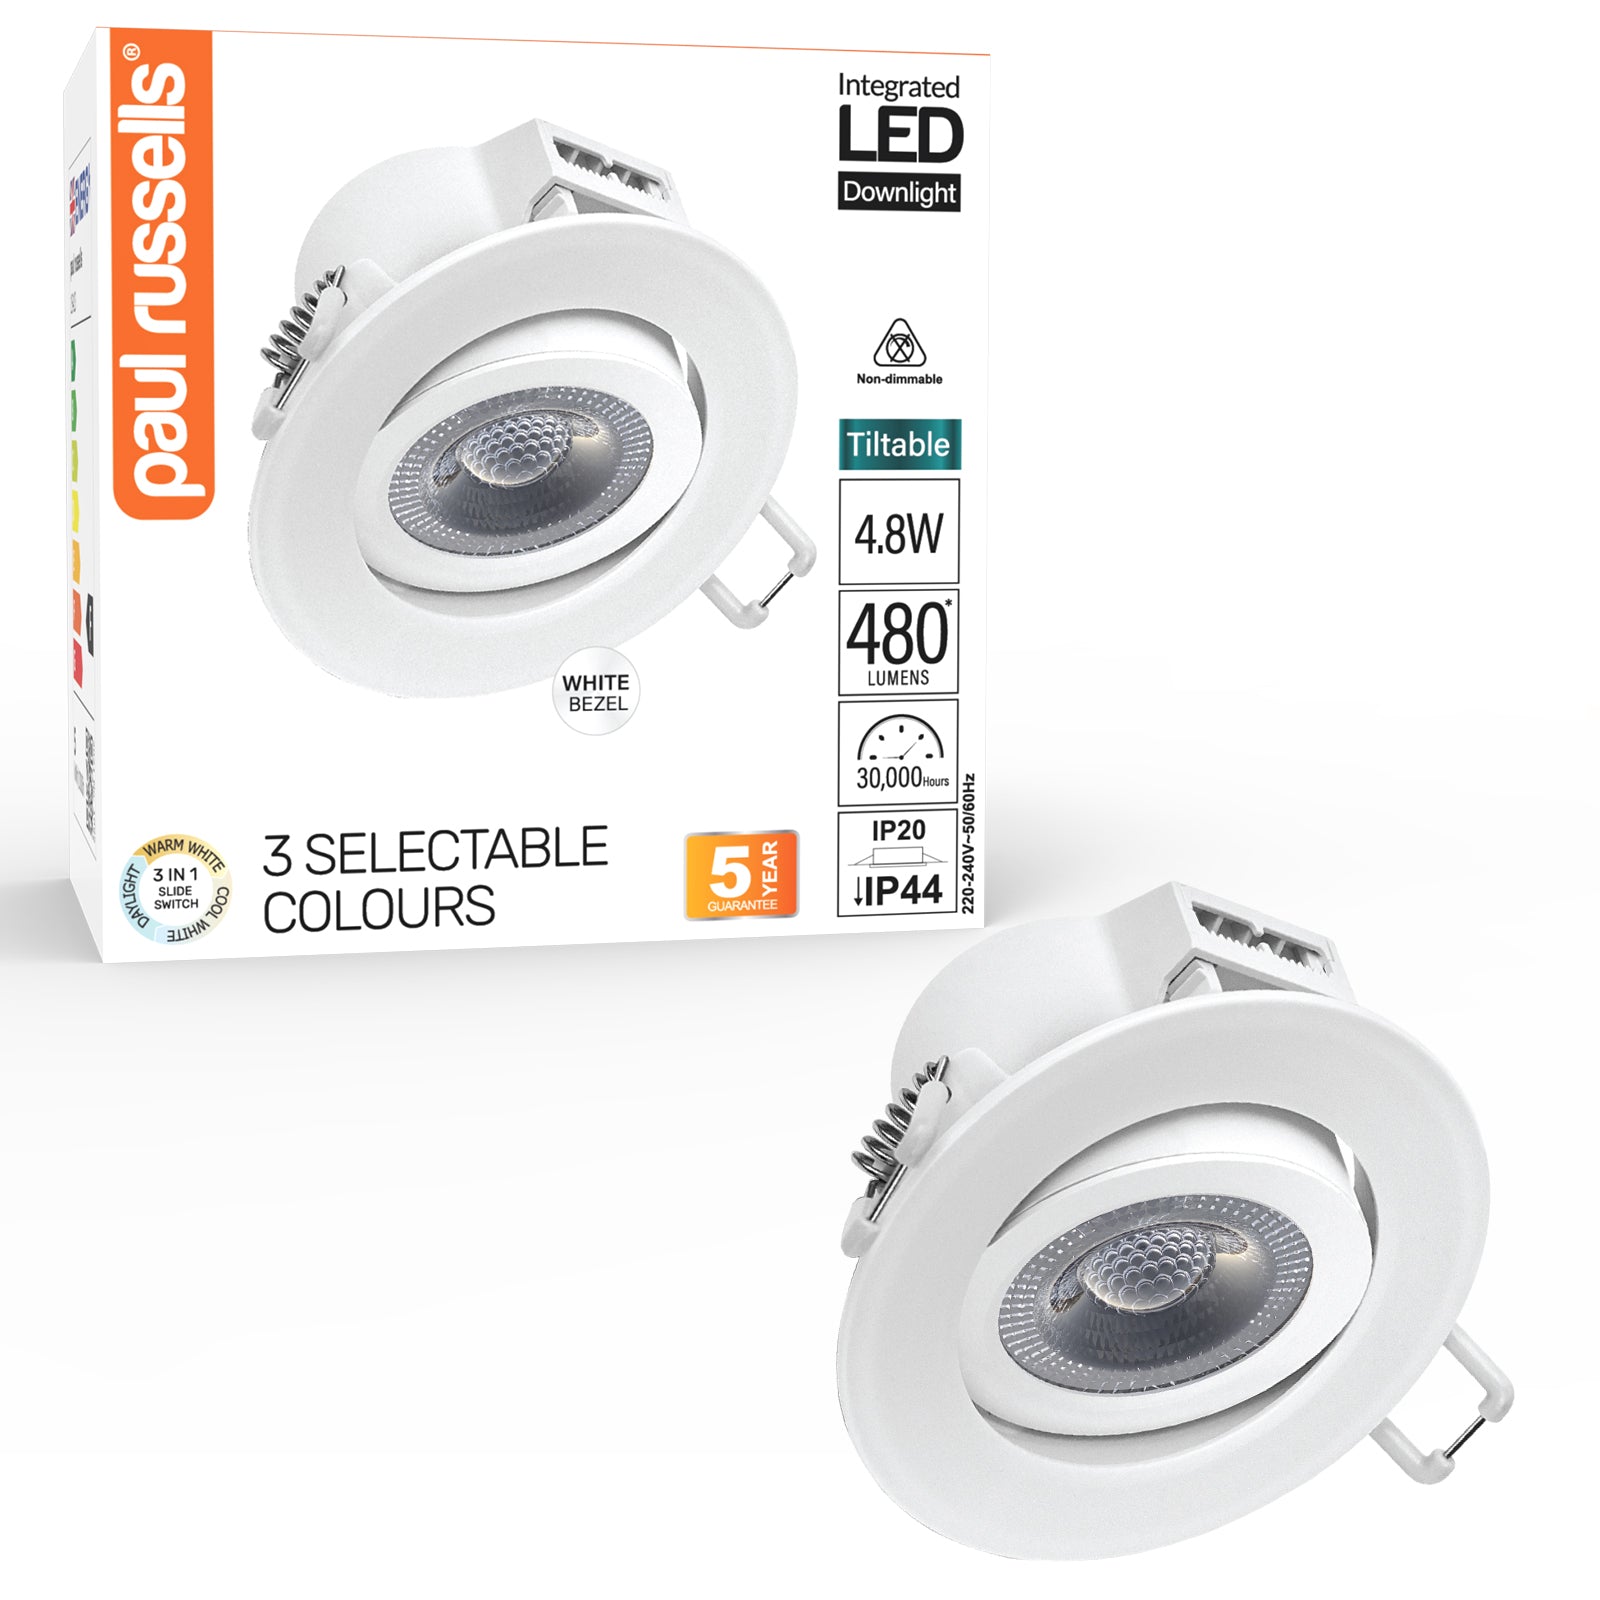 Paul Russells 4.8W LED Non Fire Rated Tiltable Downlight, Warm/Cool/Day White 3 Adjustable CCT, IP44, White Bezel